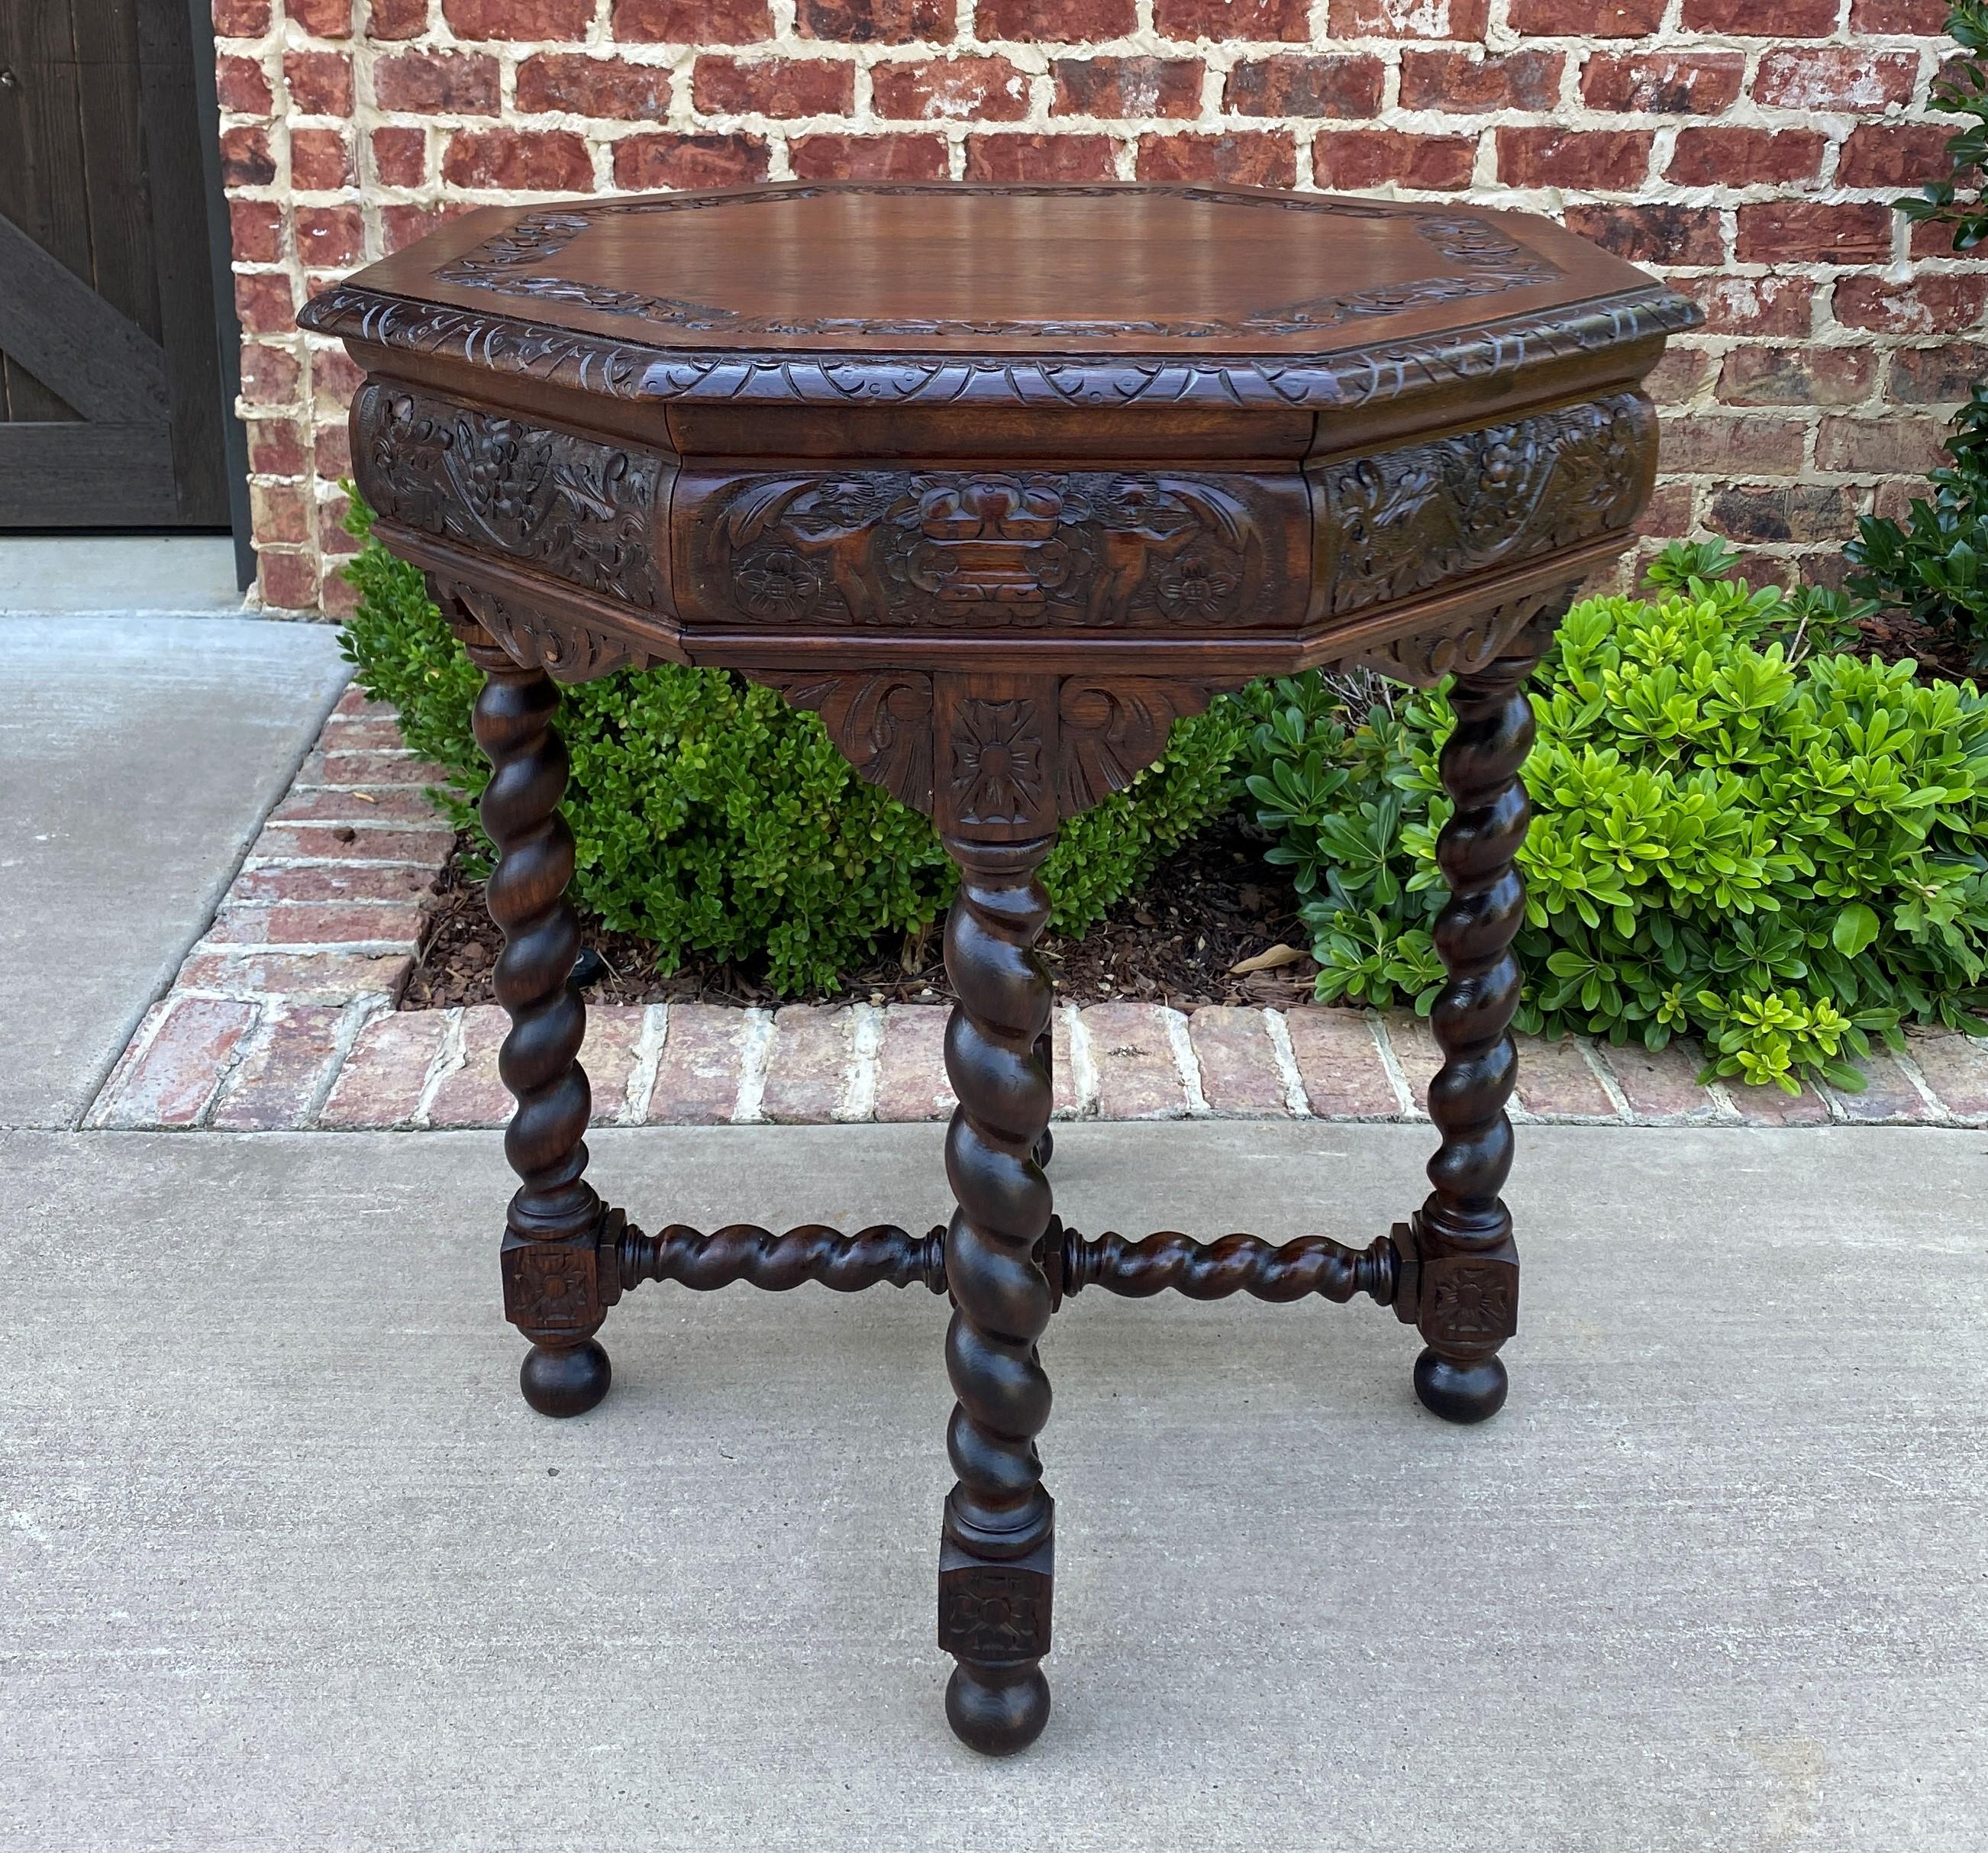 Highly carved late 19th century antique French oak octagonal barley twist entry, hall, sofa, center, parlor or end table ~~Victorian Era Renaissance Revival~~c. 1890s

These versatile tables were very popular in late Victorian era French country